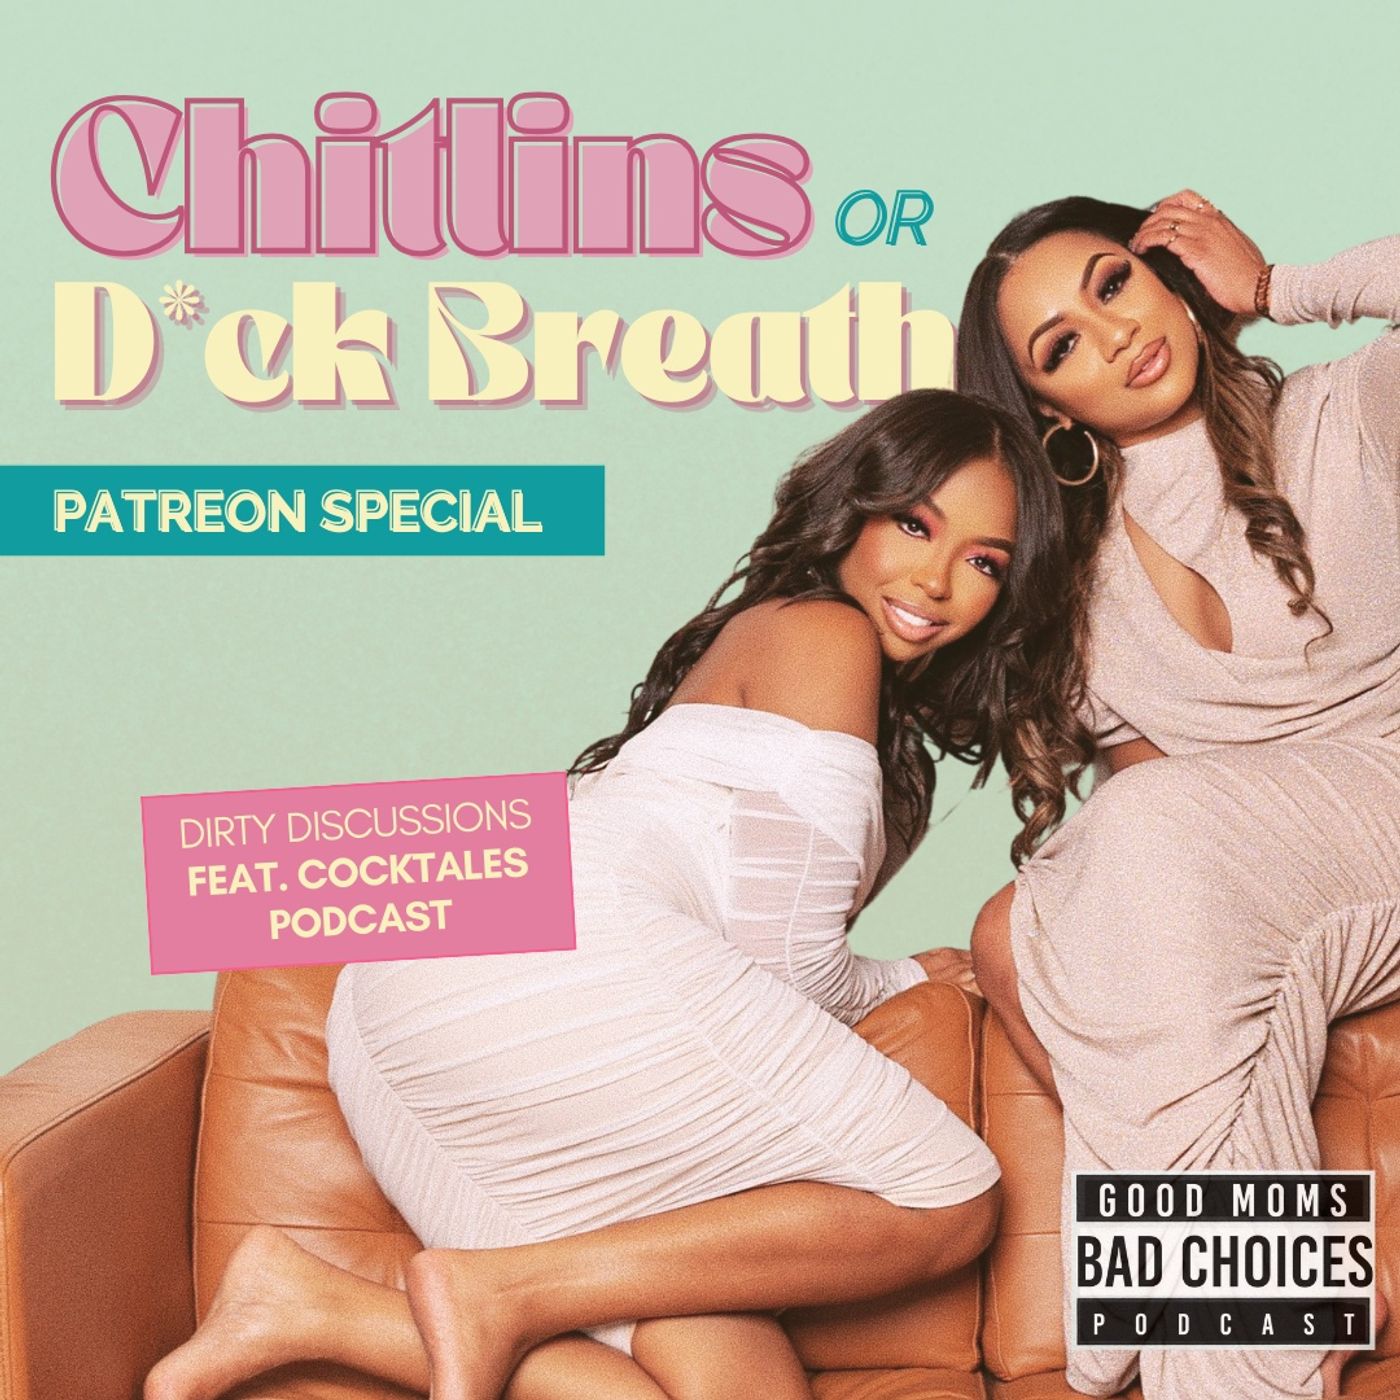 Chitlins & D*ck Breath feat. Cocktales: Dirty Discussions Podcast